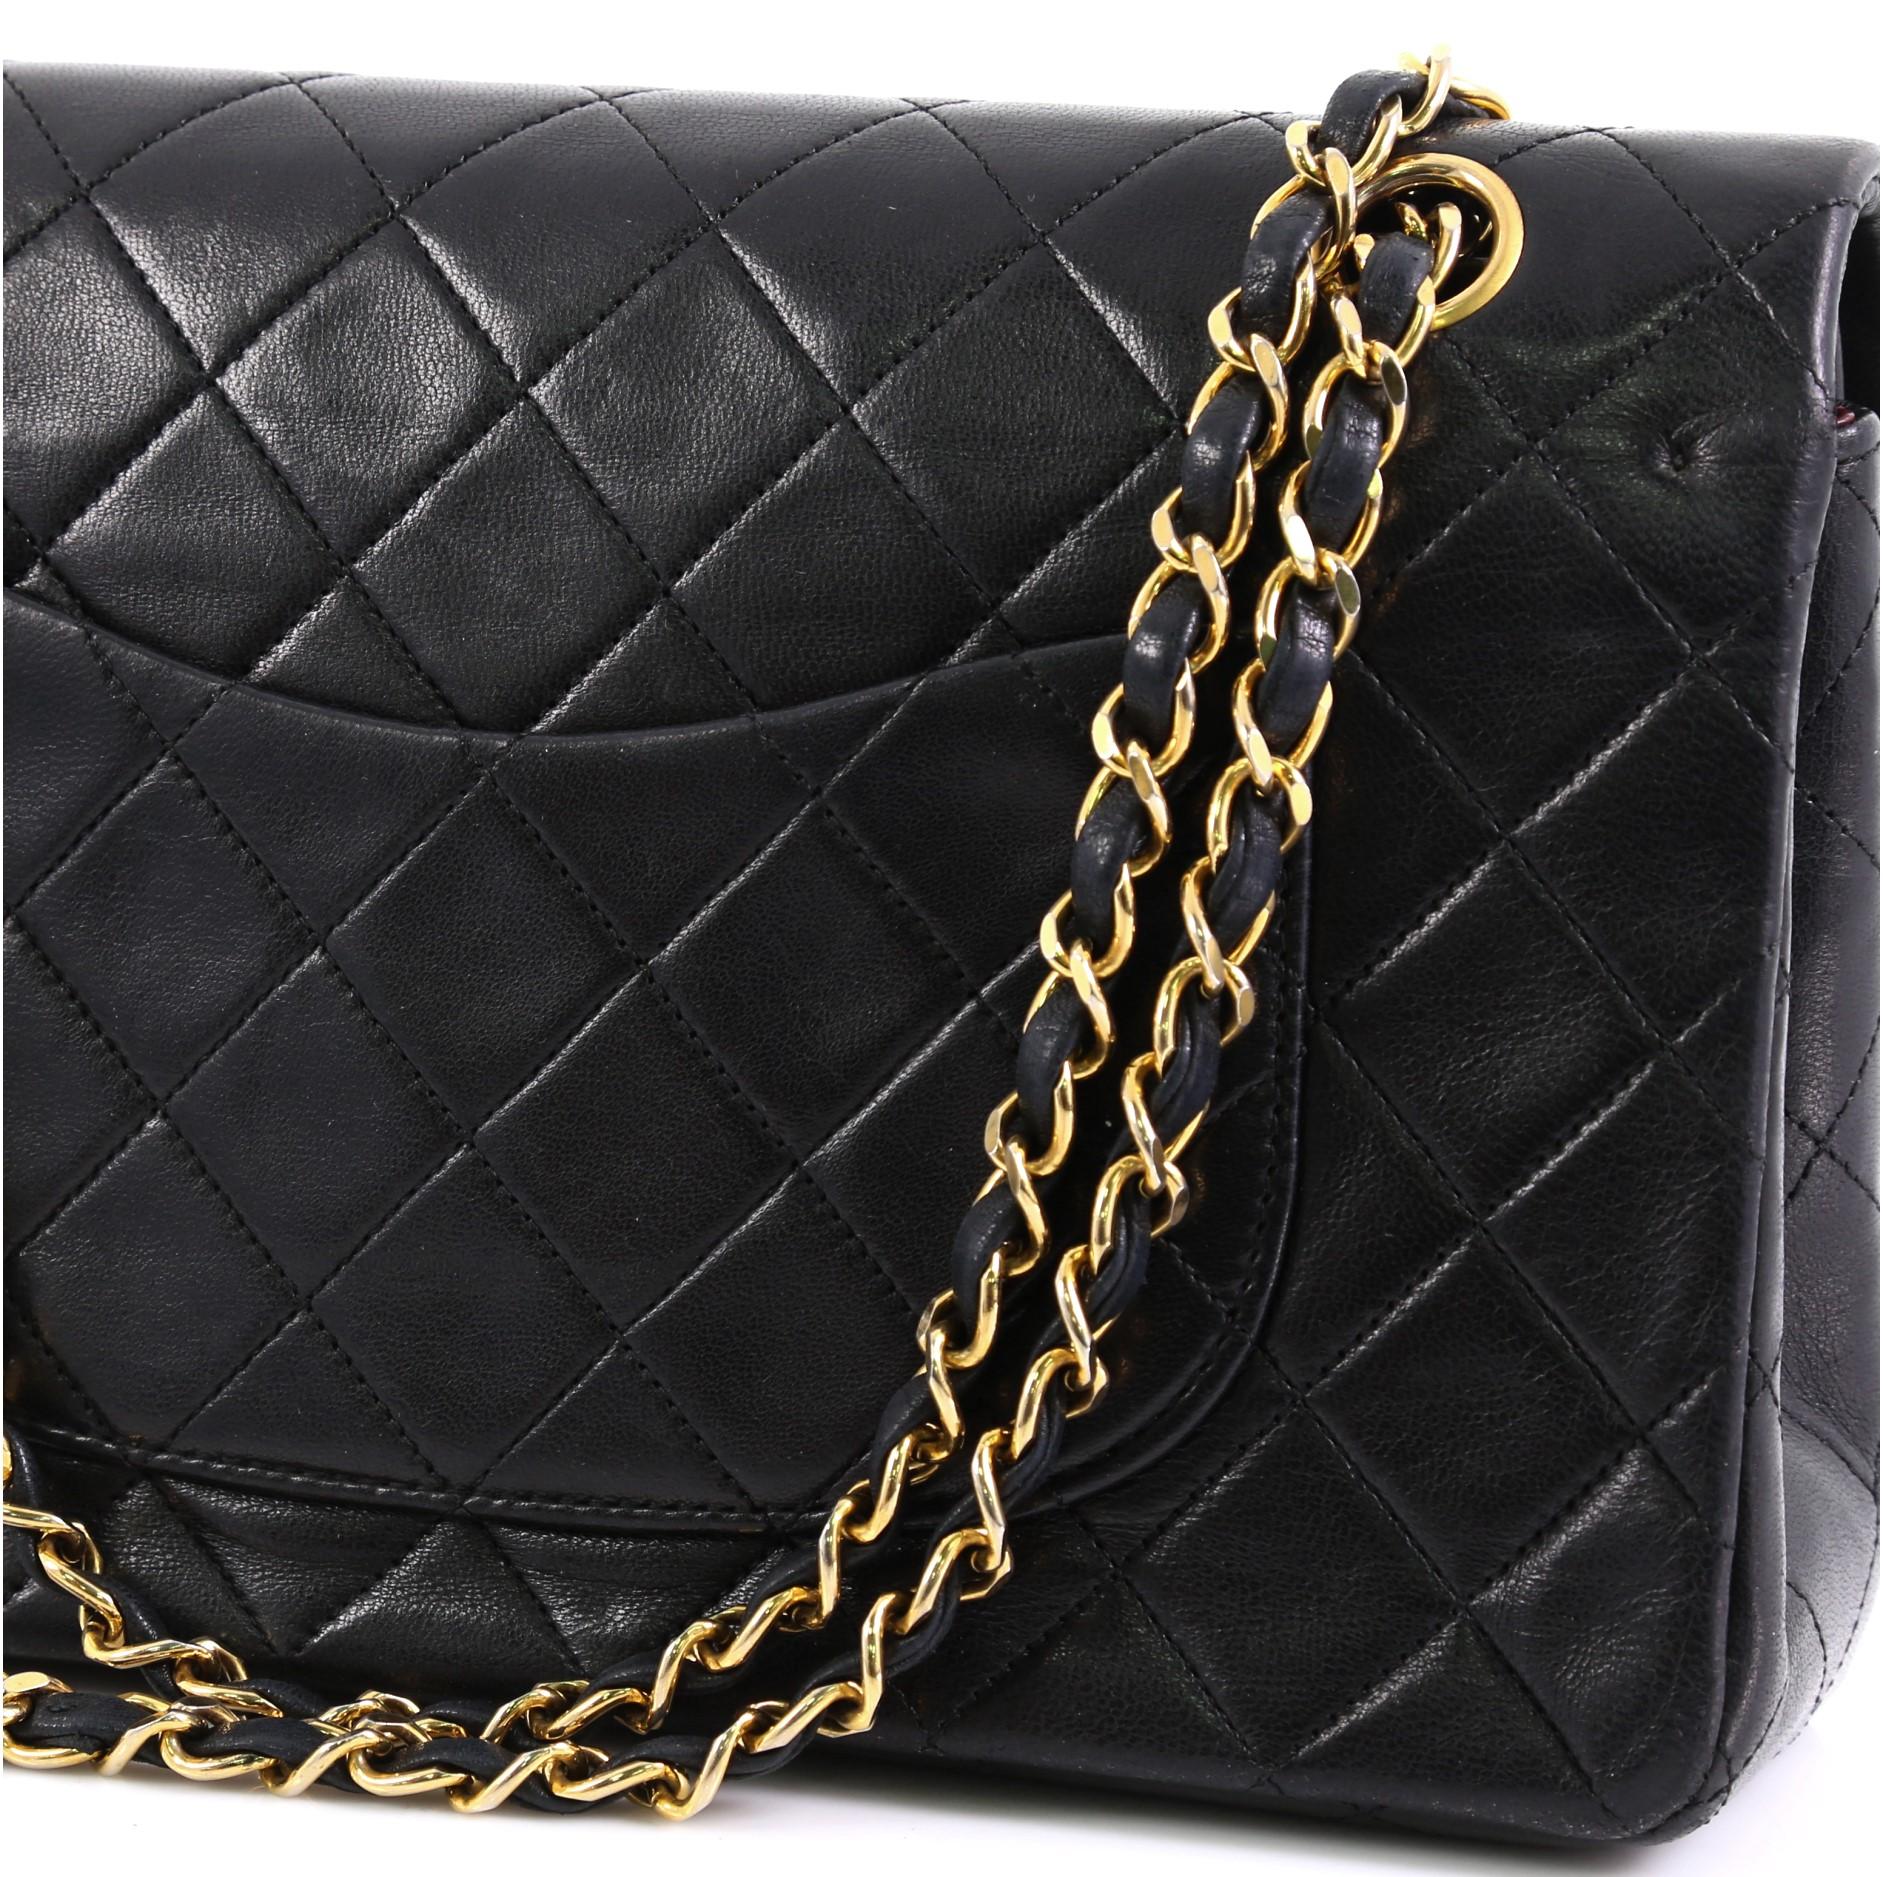 Women's or Men's Chanel Vintage Classic Double Flap Bag Quilted Lambskin Medium